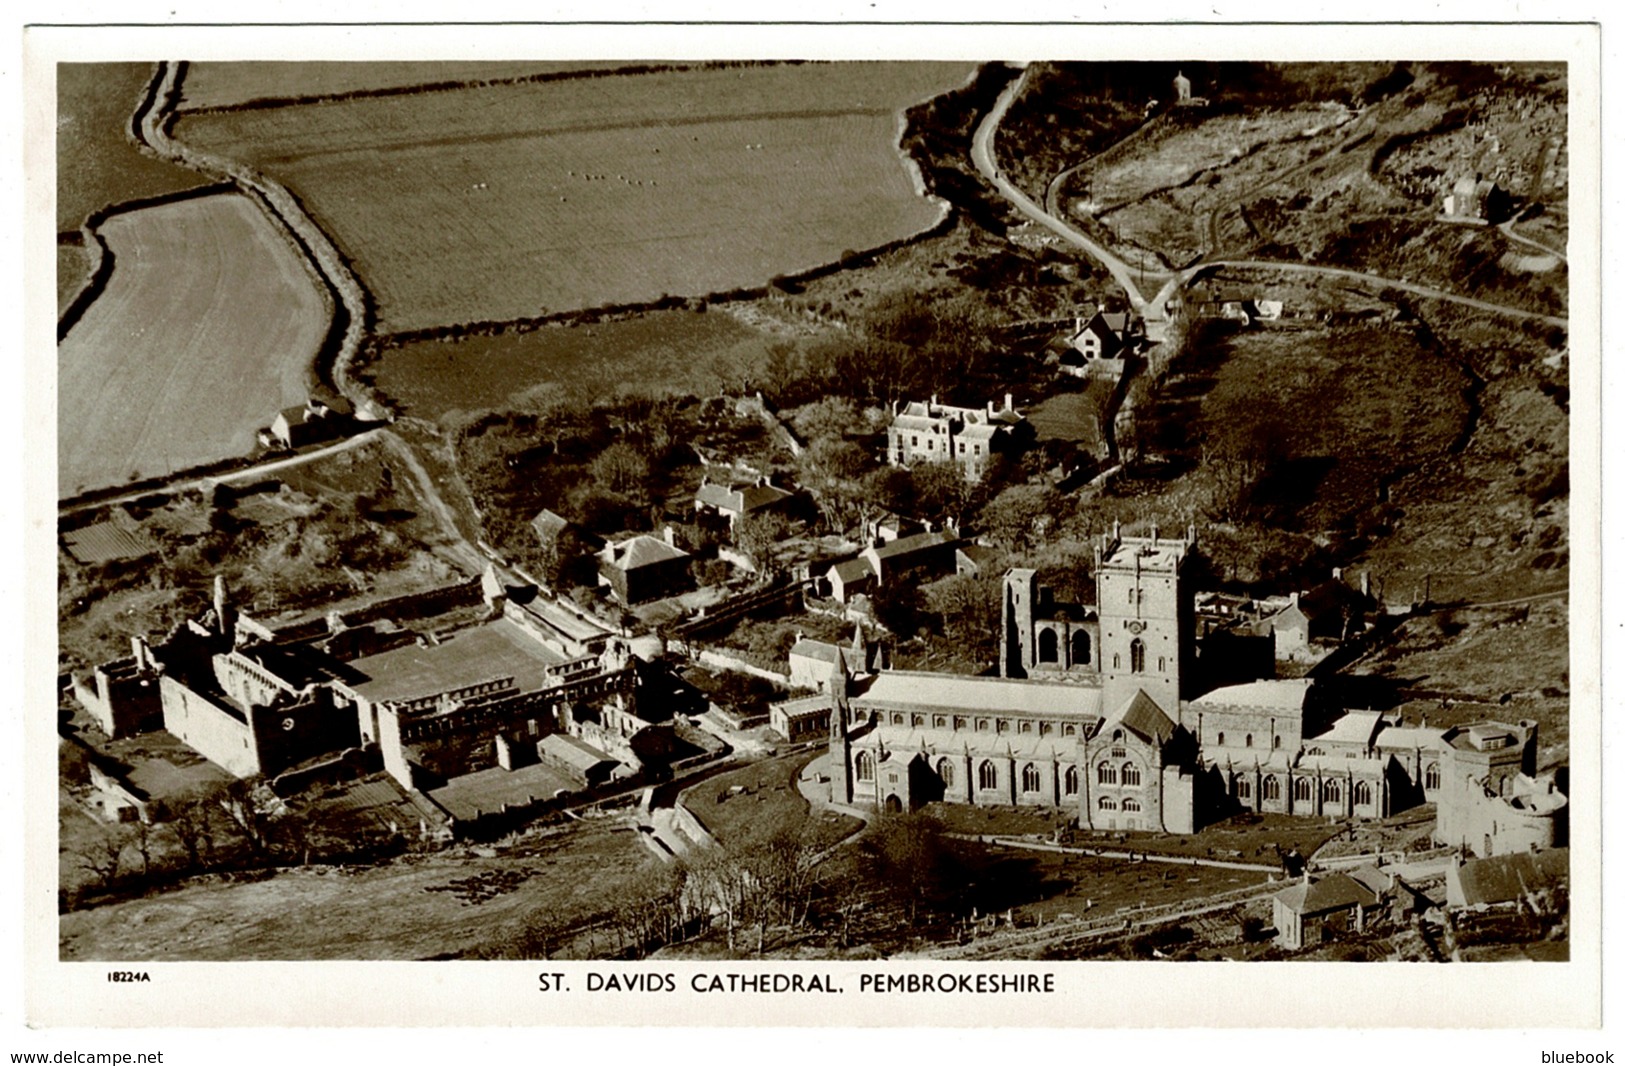 Ref 1257 - Real Photo Postcard - Aerial View Of Houses & St Davids Cathedral - Pembrokeshire Wales - Pembrokeshire